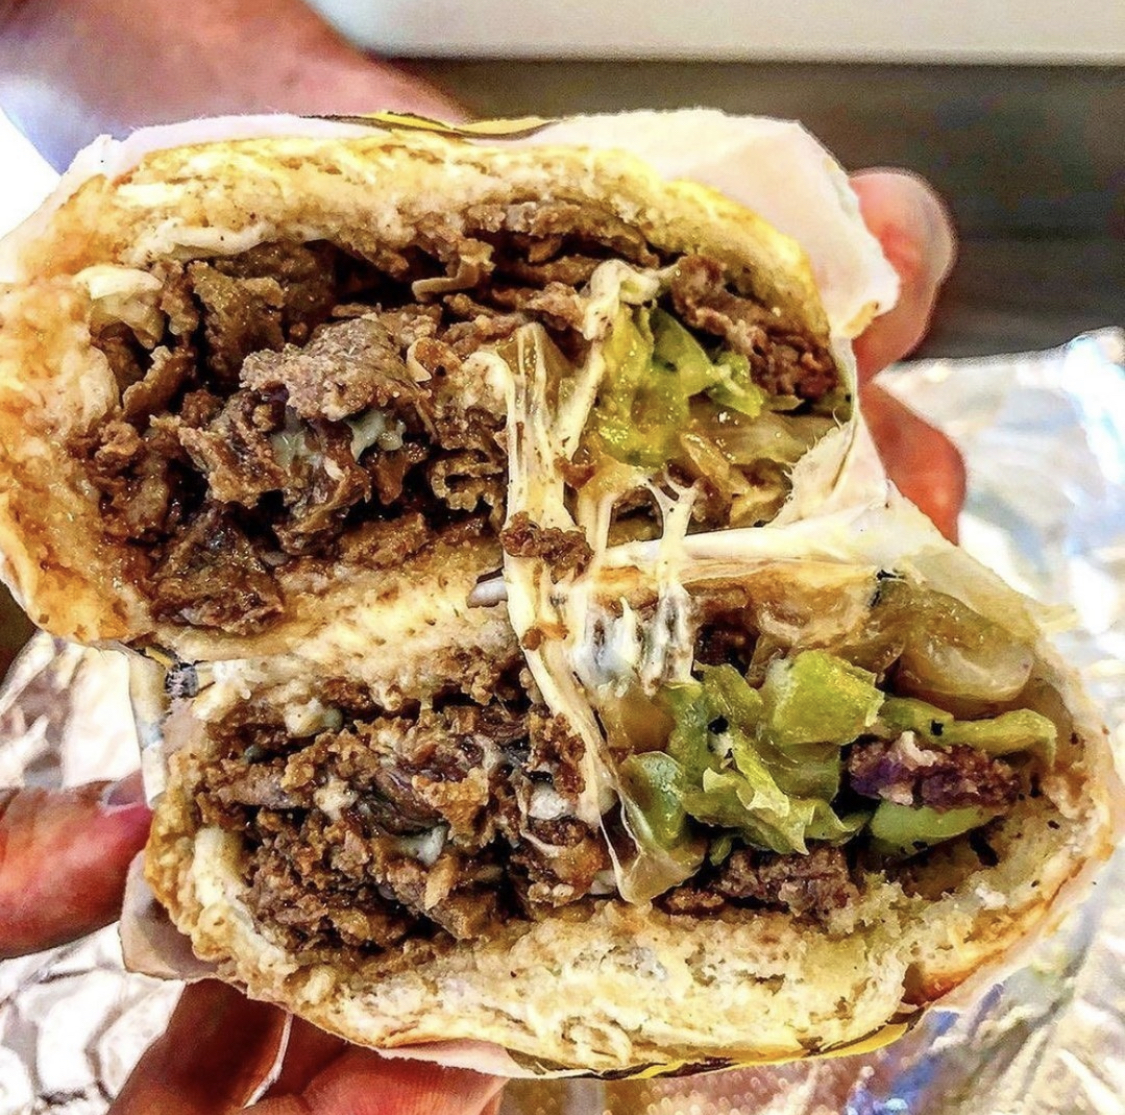 It's not a WICH unless there is cheese in between every layer 🥖🧀

#whichwichuk #bestsandwich #premium #phillycheesesteak #yum #foodie #london #britishbeefweek